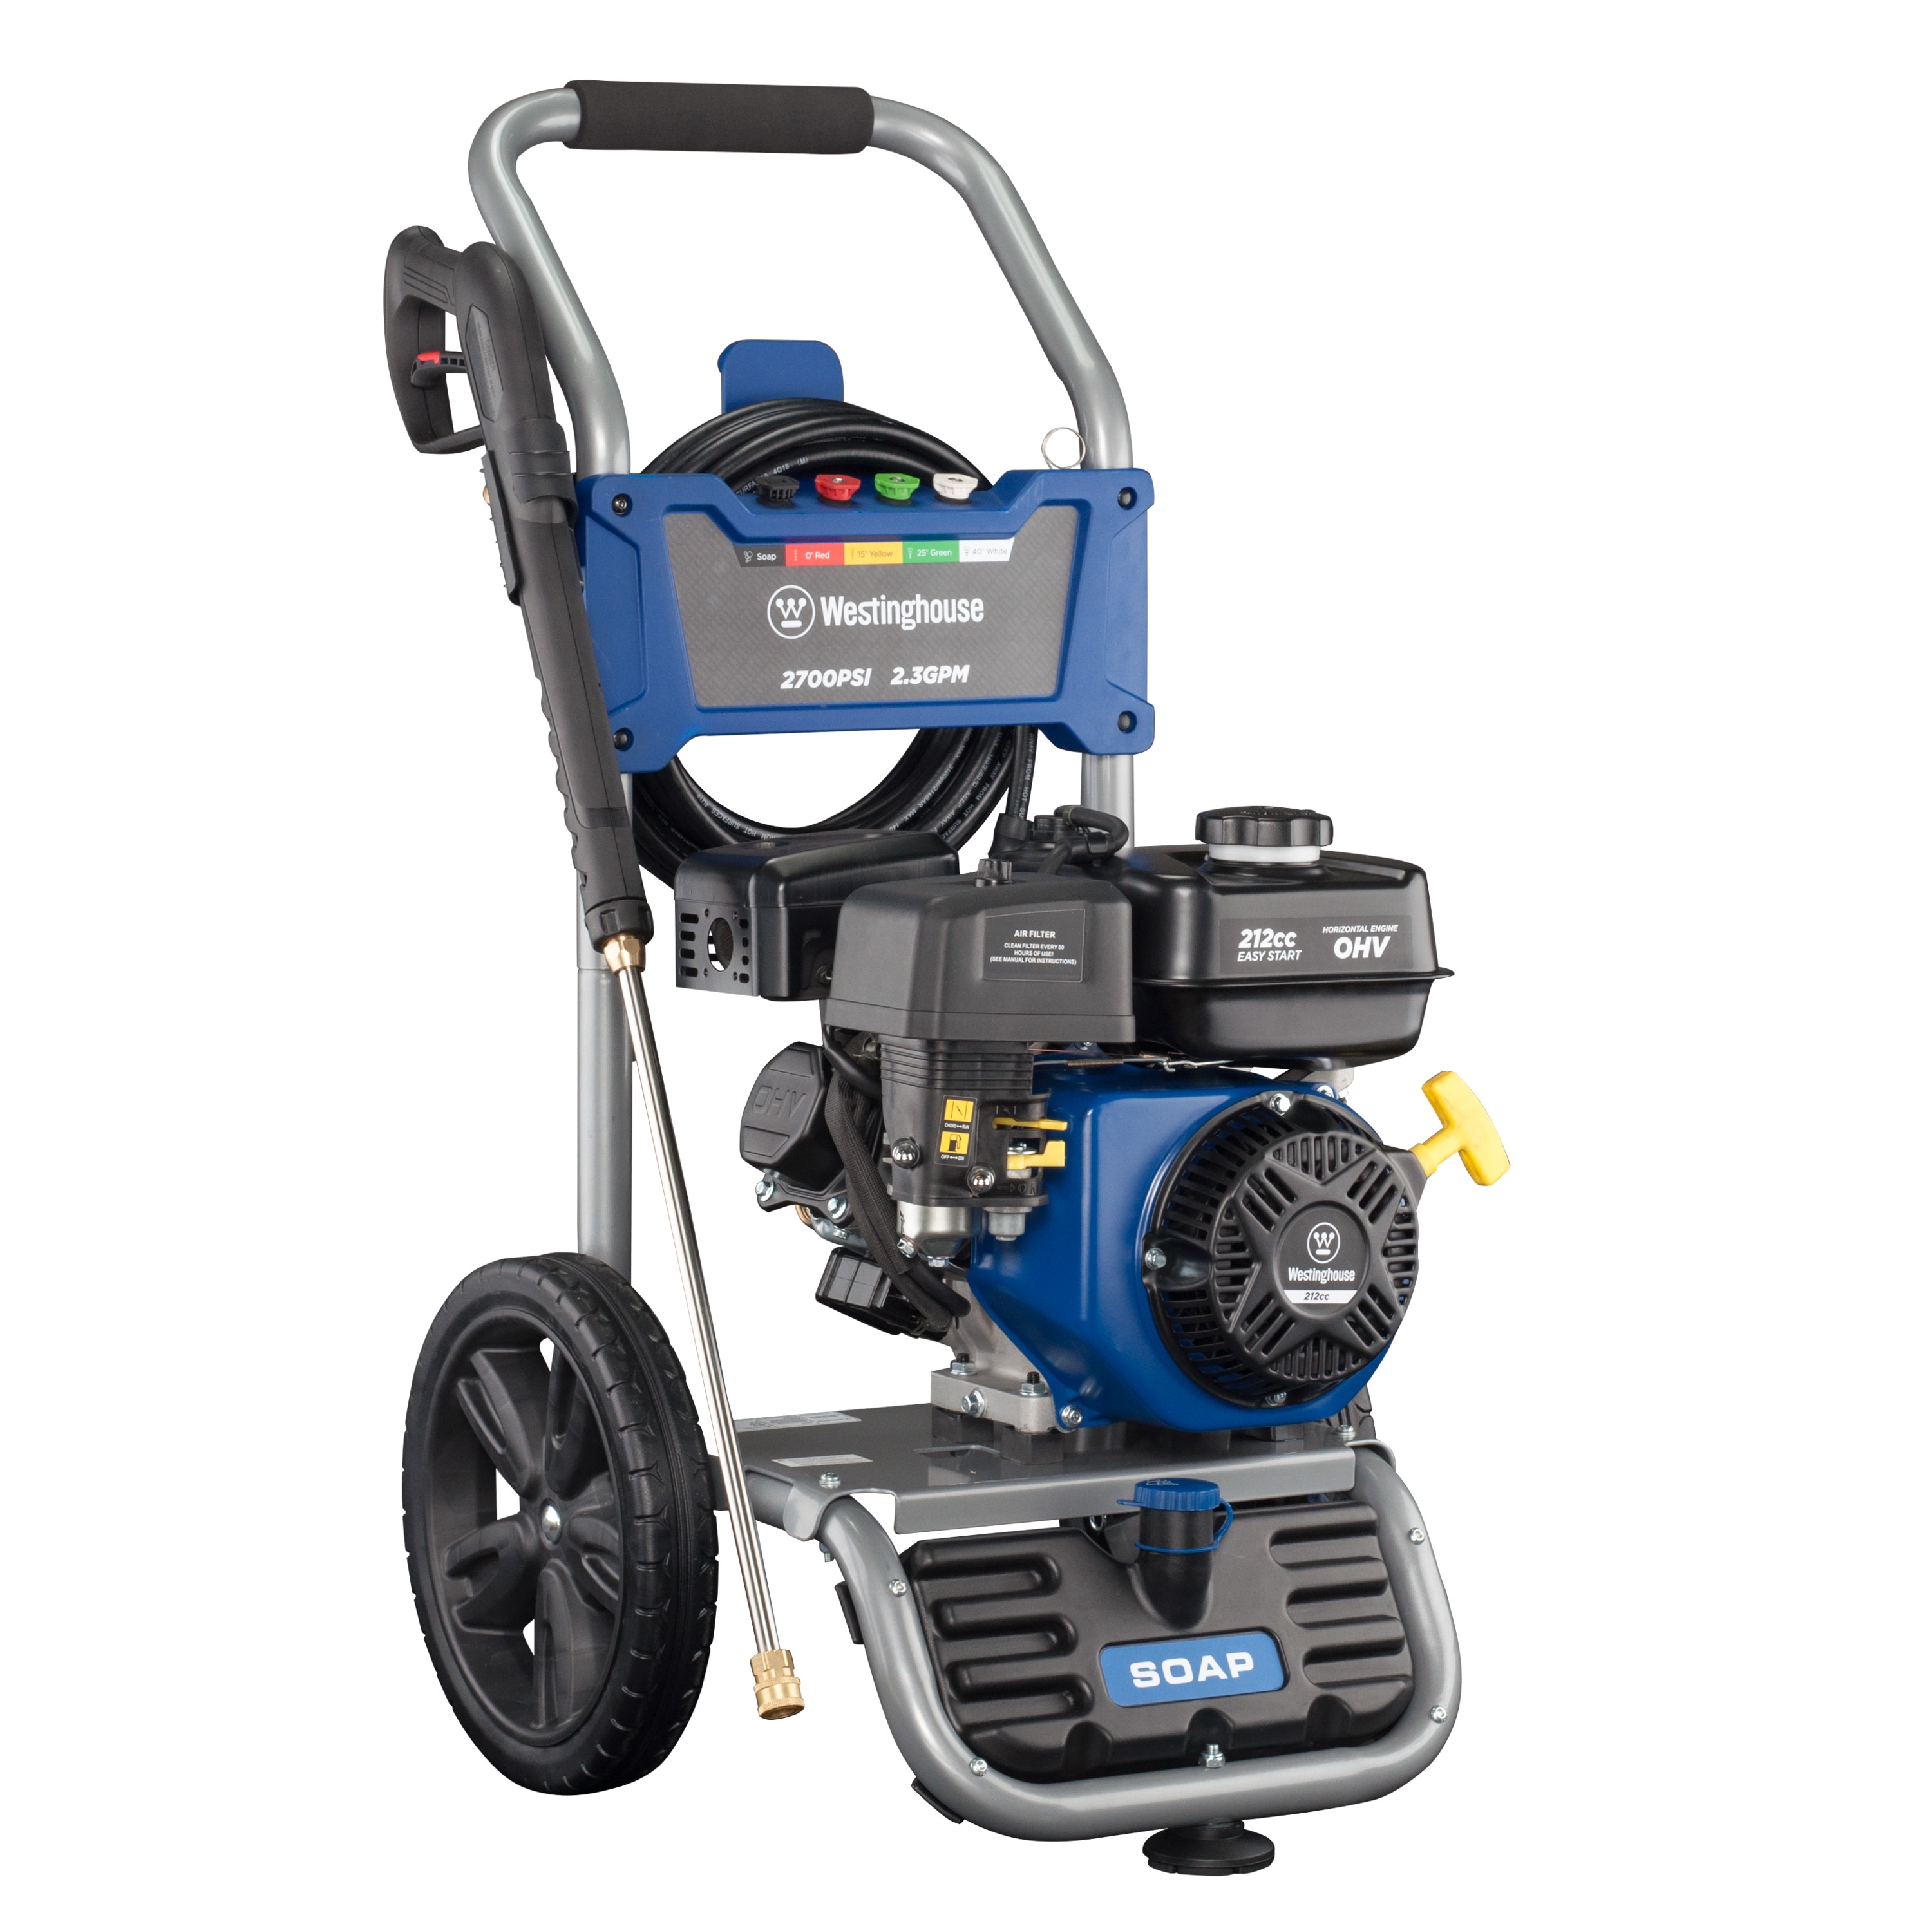 Westinghouse WPX2700 Gas Powered Pressure Washer 2700 PSI and 2.3 GPM Soap Tank and Four Nozzle Set 3200 PSI Rating CARB Compliant & Karcher 15-Inch Pressure Washer Surface Cleaner Attachment 